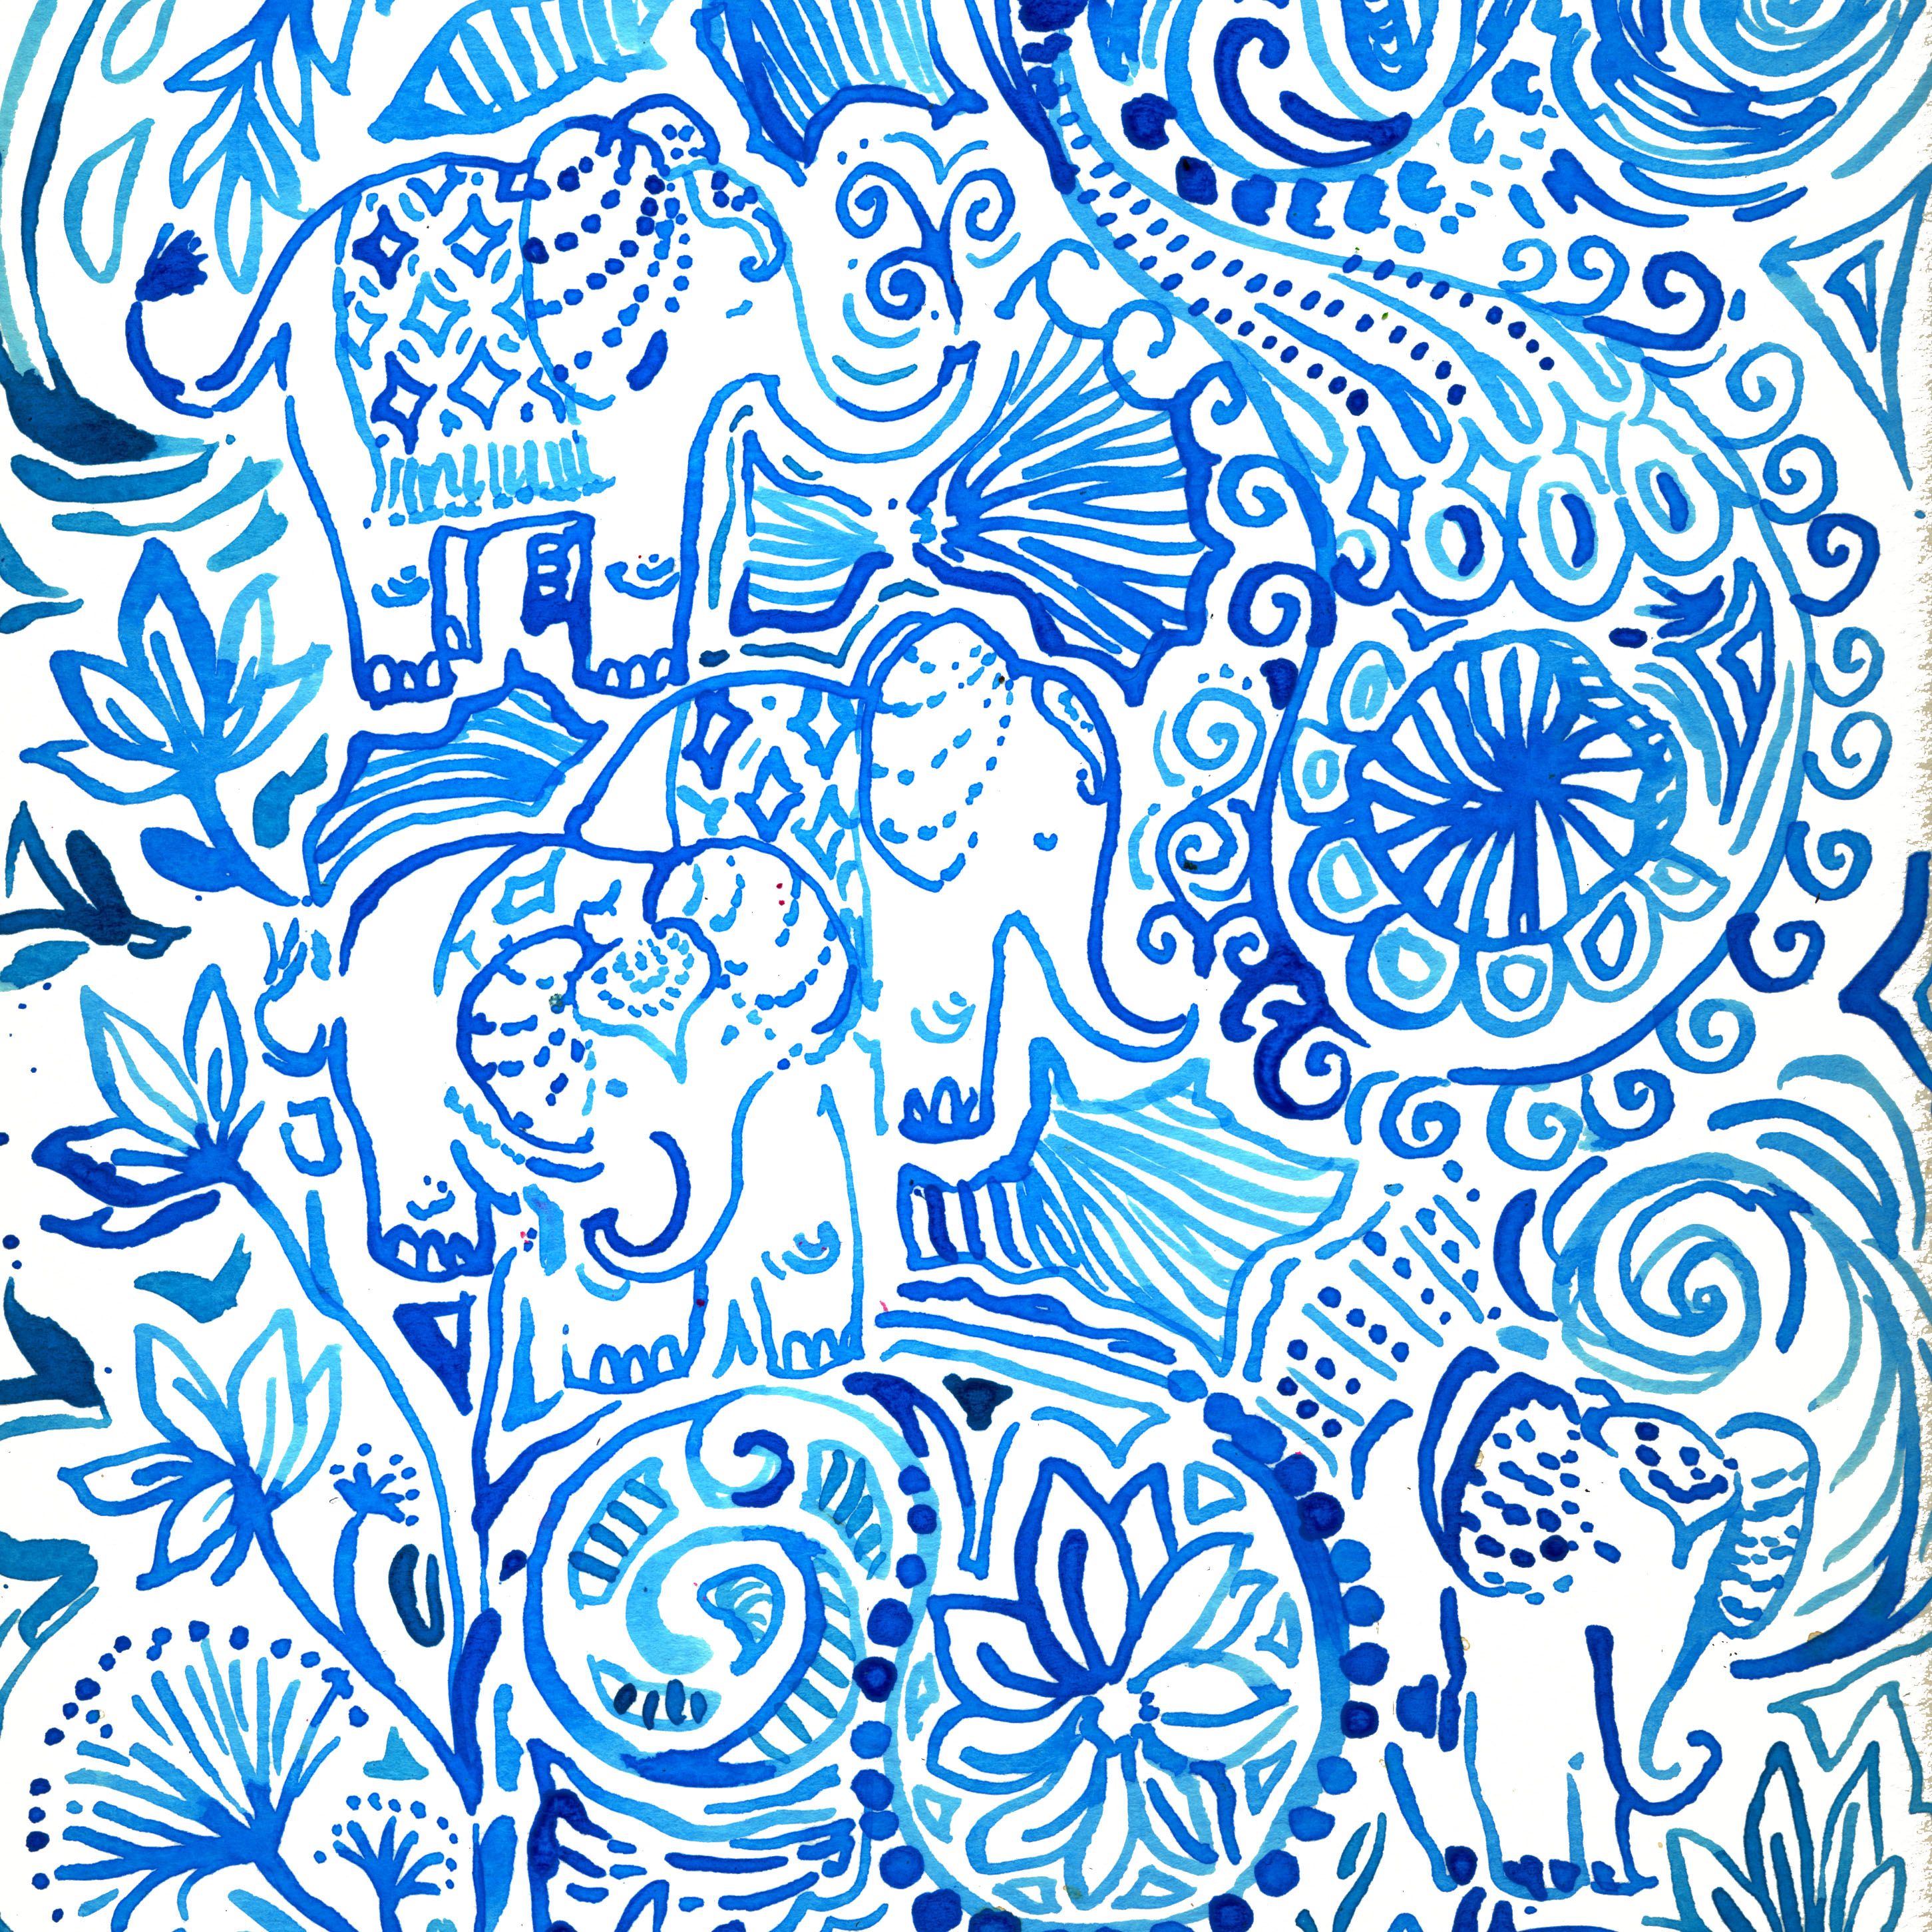 #lilly5x5 Lilly Pulitzer Patterns, Lilly Pulitzer Prints, - Blue Lilly Pulitzer Prints , HD Wallpaper & Backgrounds